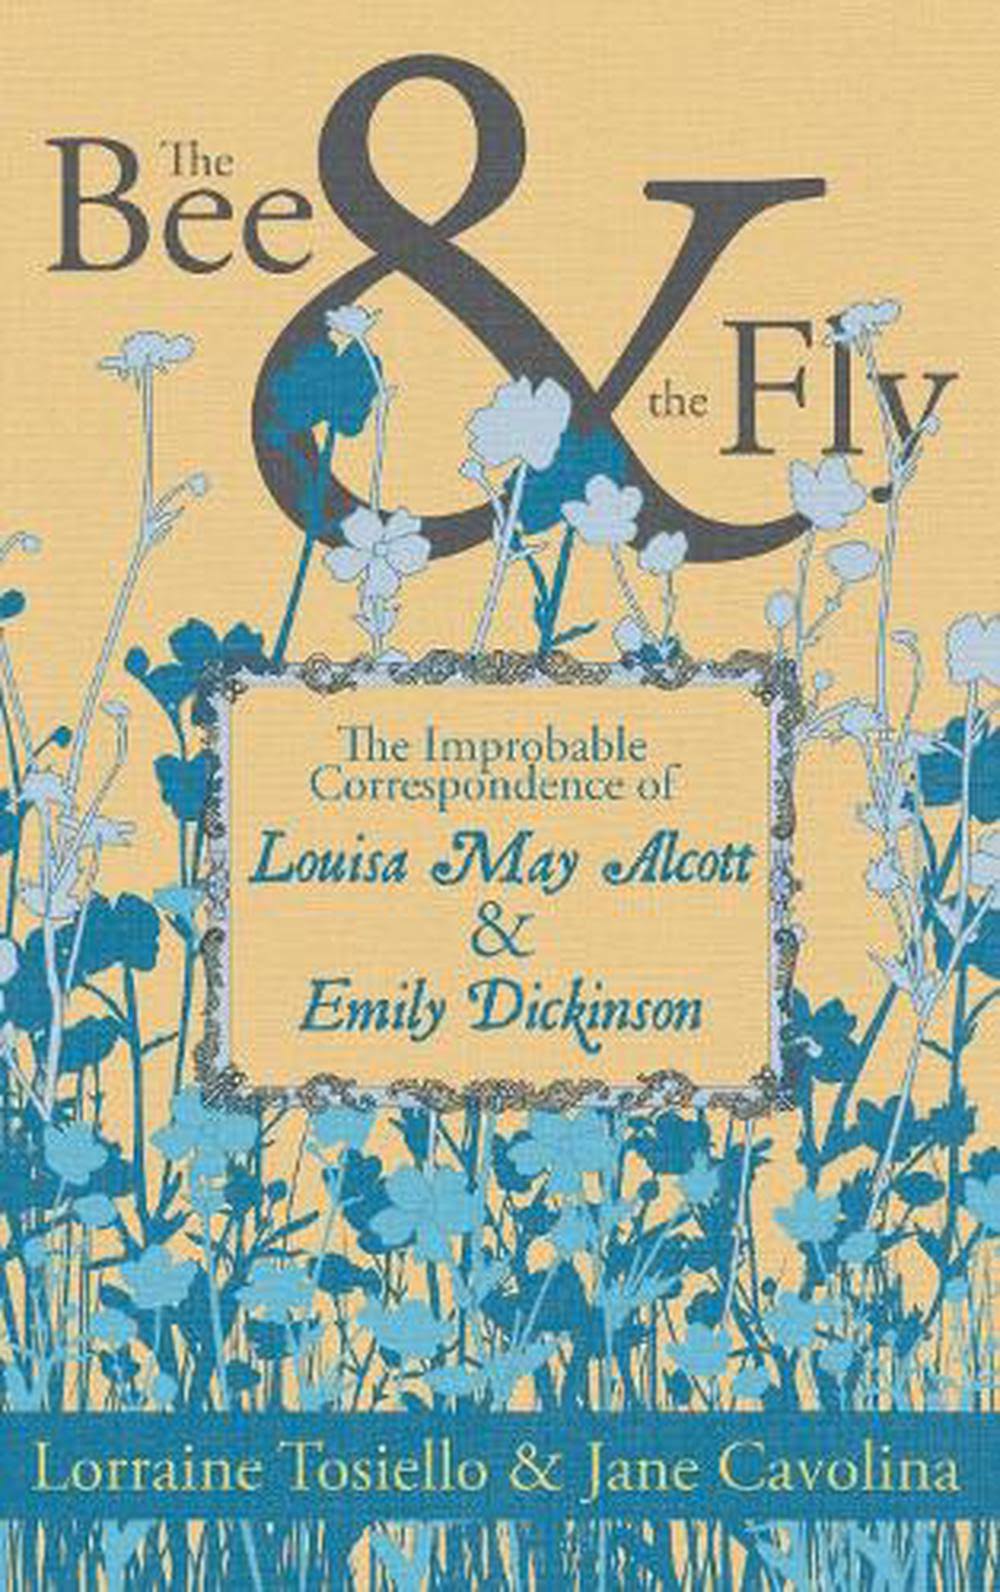 The Bee and the Fly: The Improbable Correspondence of Louisa May Alcott and Emily Dickinson [Book]